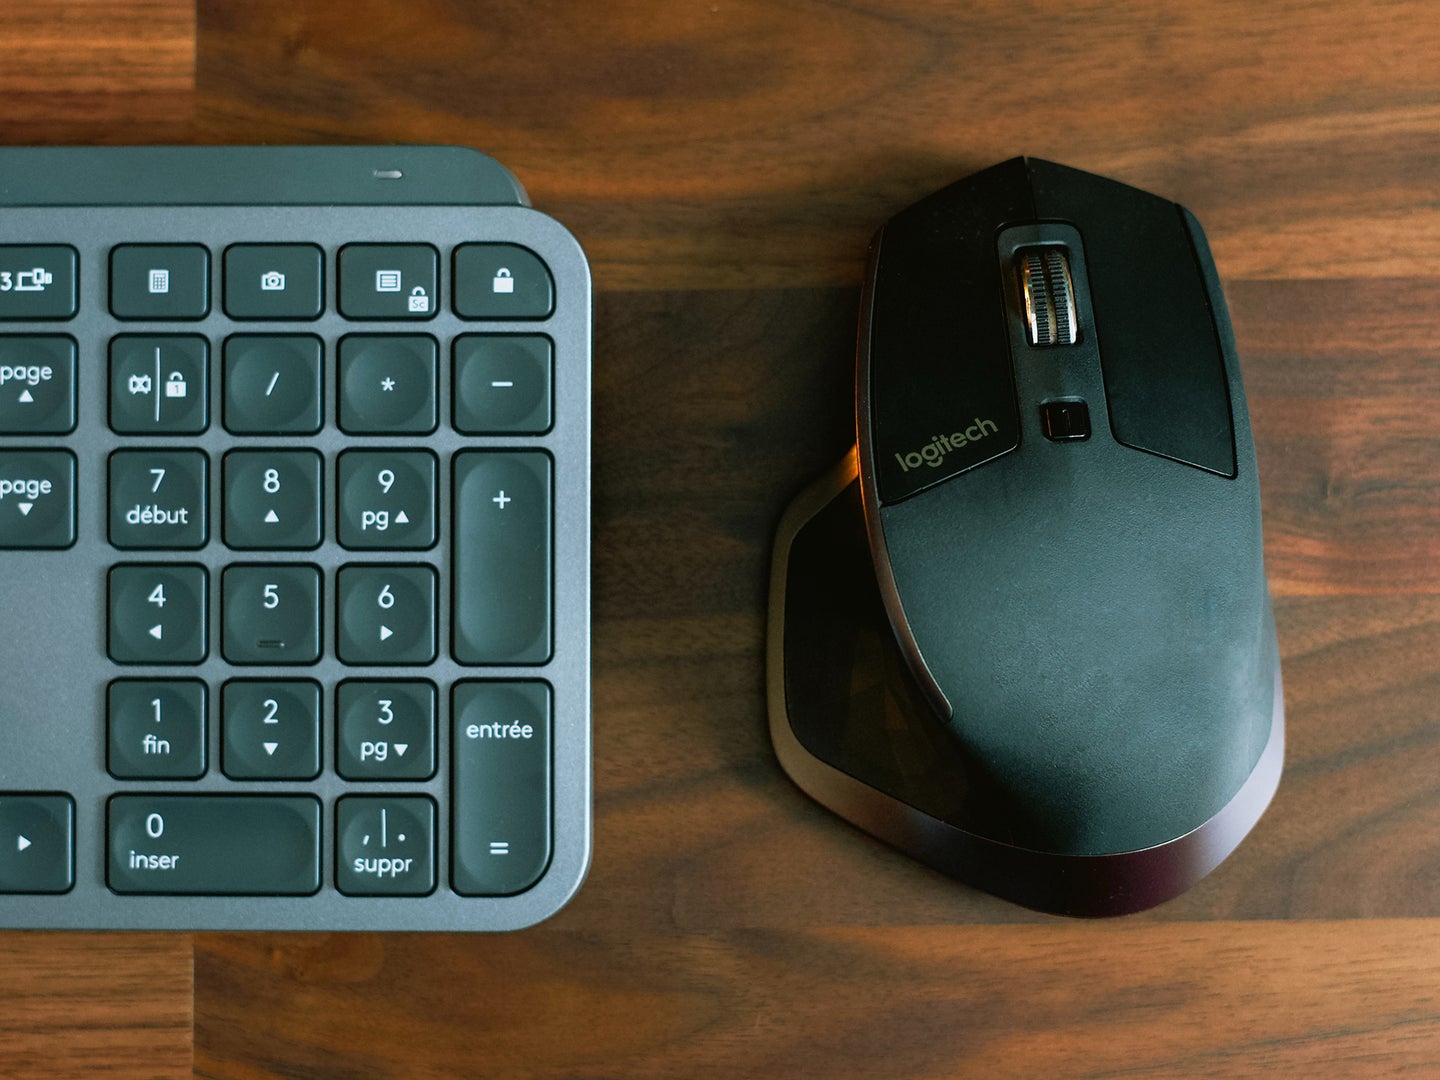 Black mouse and keyboard sitting side by side on a wooden desk.